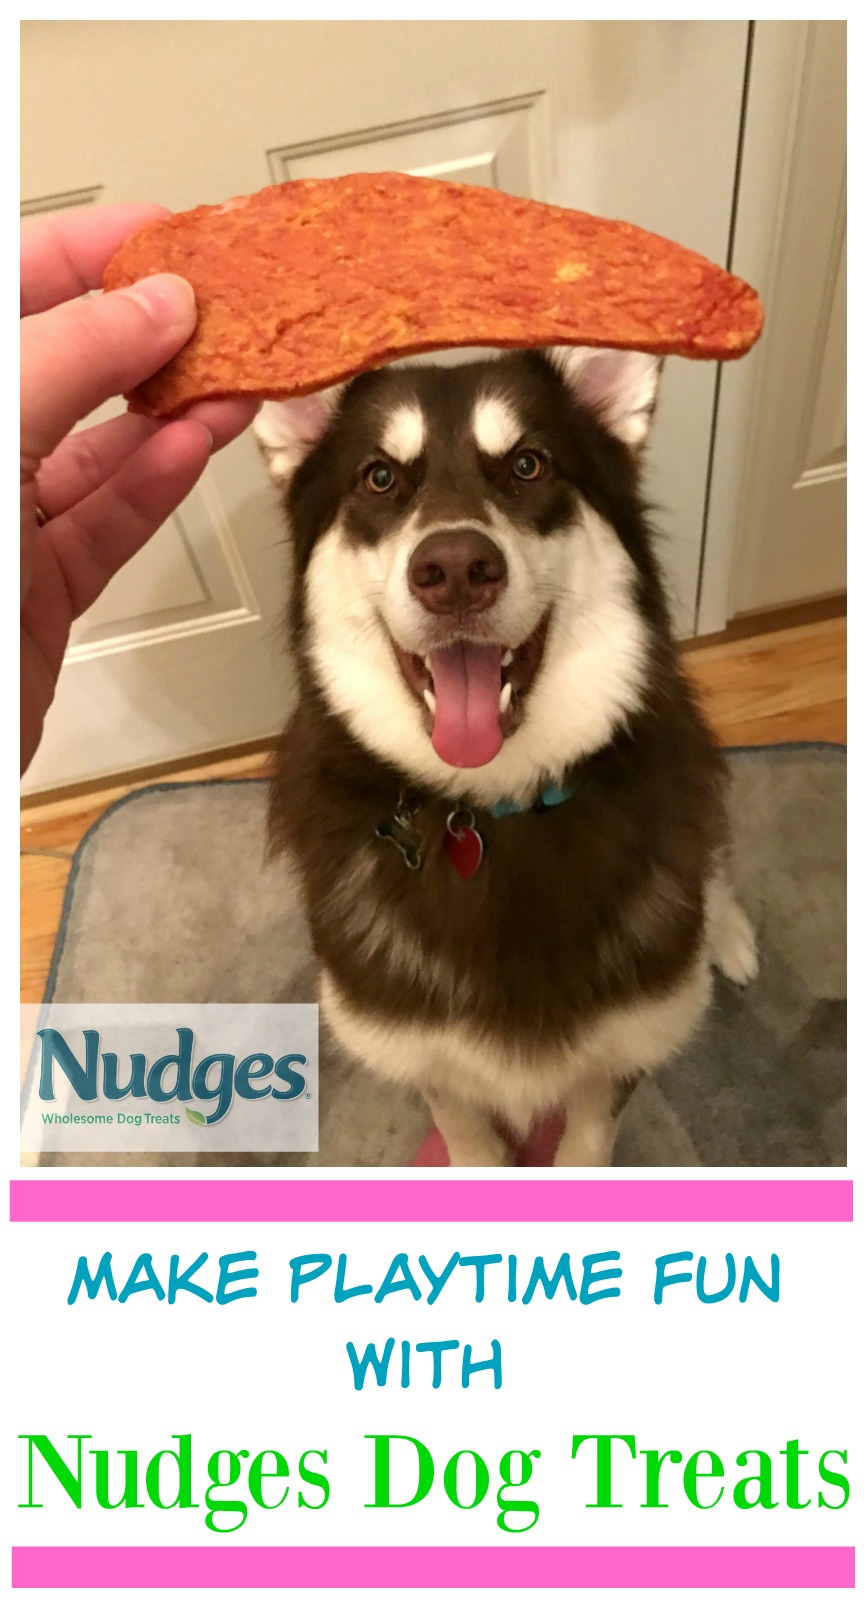 Looking for delicious, budget friendly, high quality dog treats that are made in the United States? See why we loved Nudges Dog Treats for Ivi & Rylie here! #NudgeThemBack